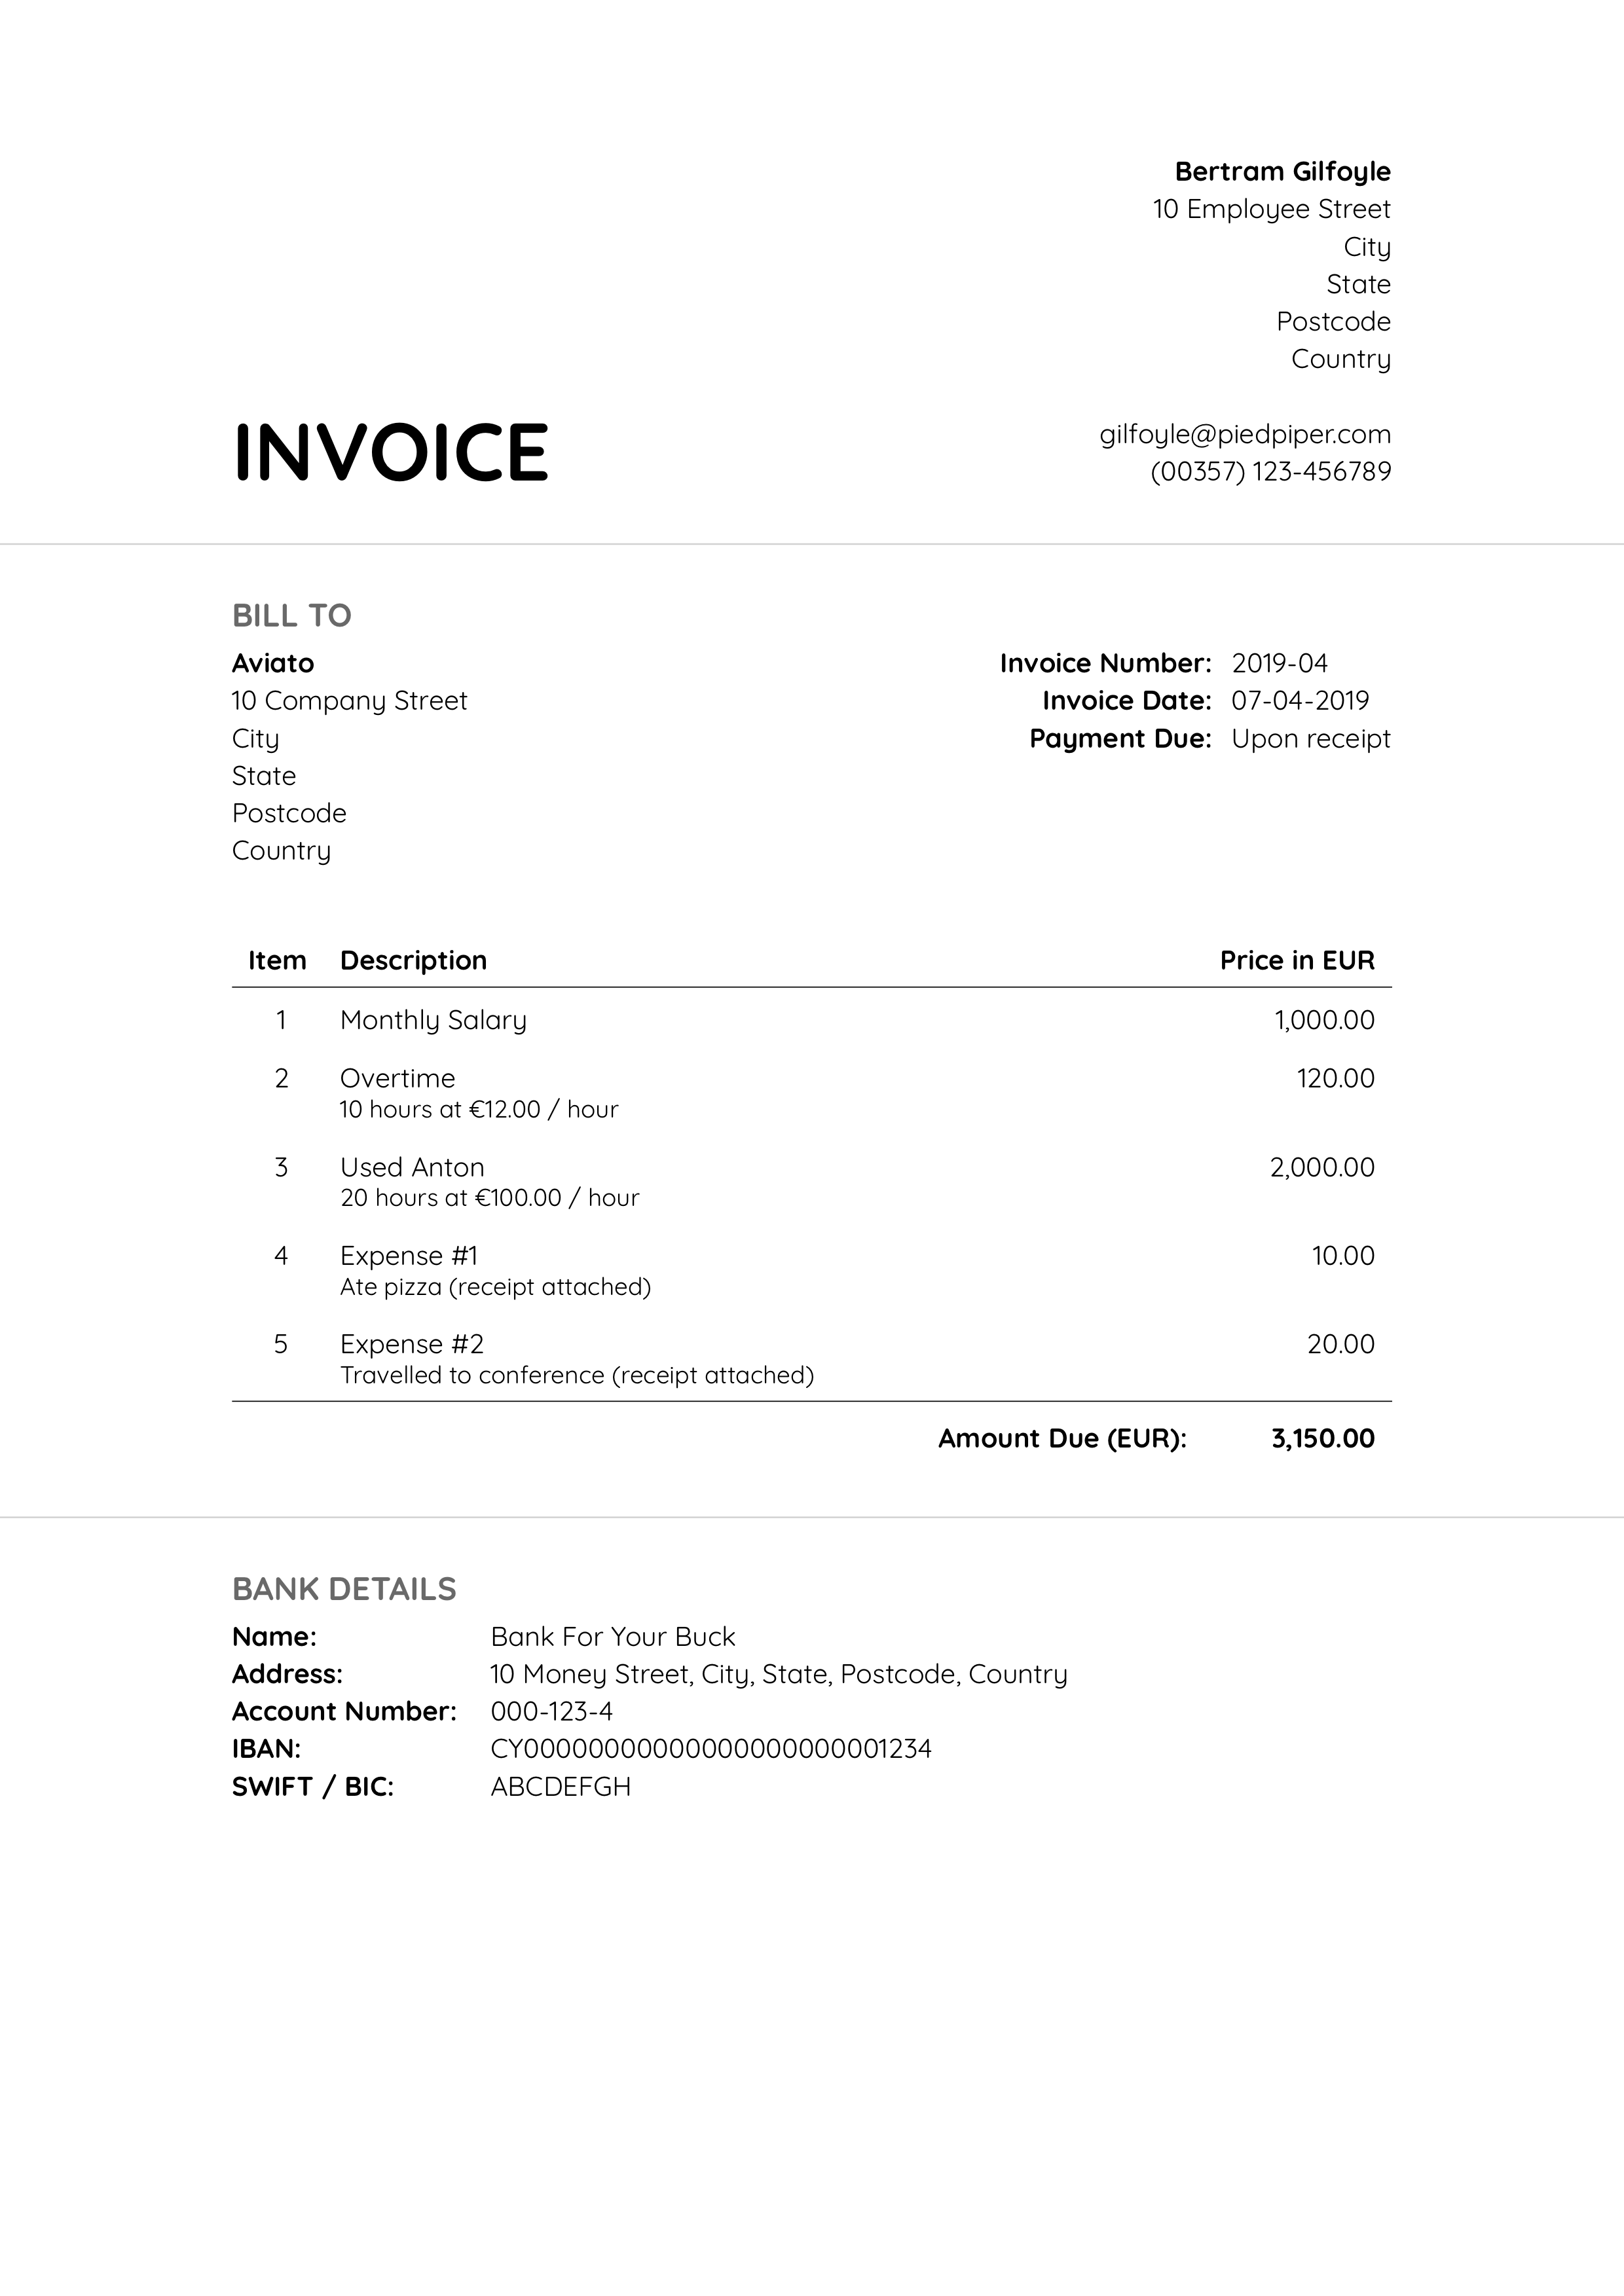 Example invoice using the Quicksand font